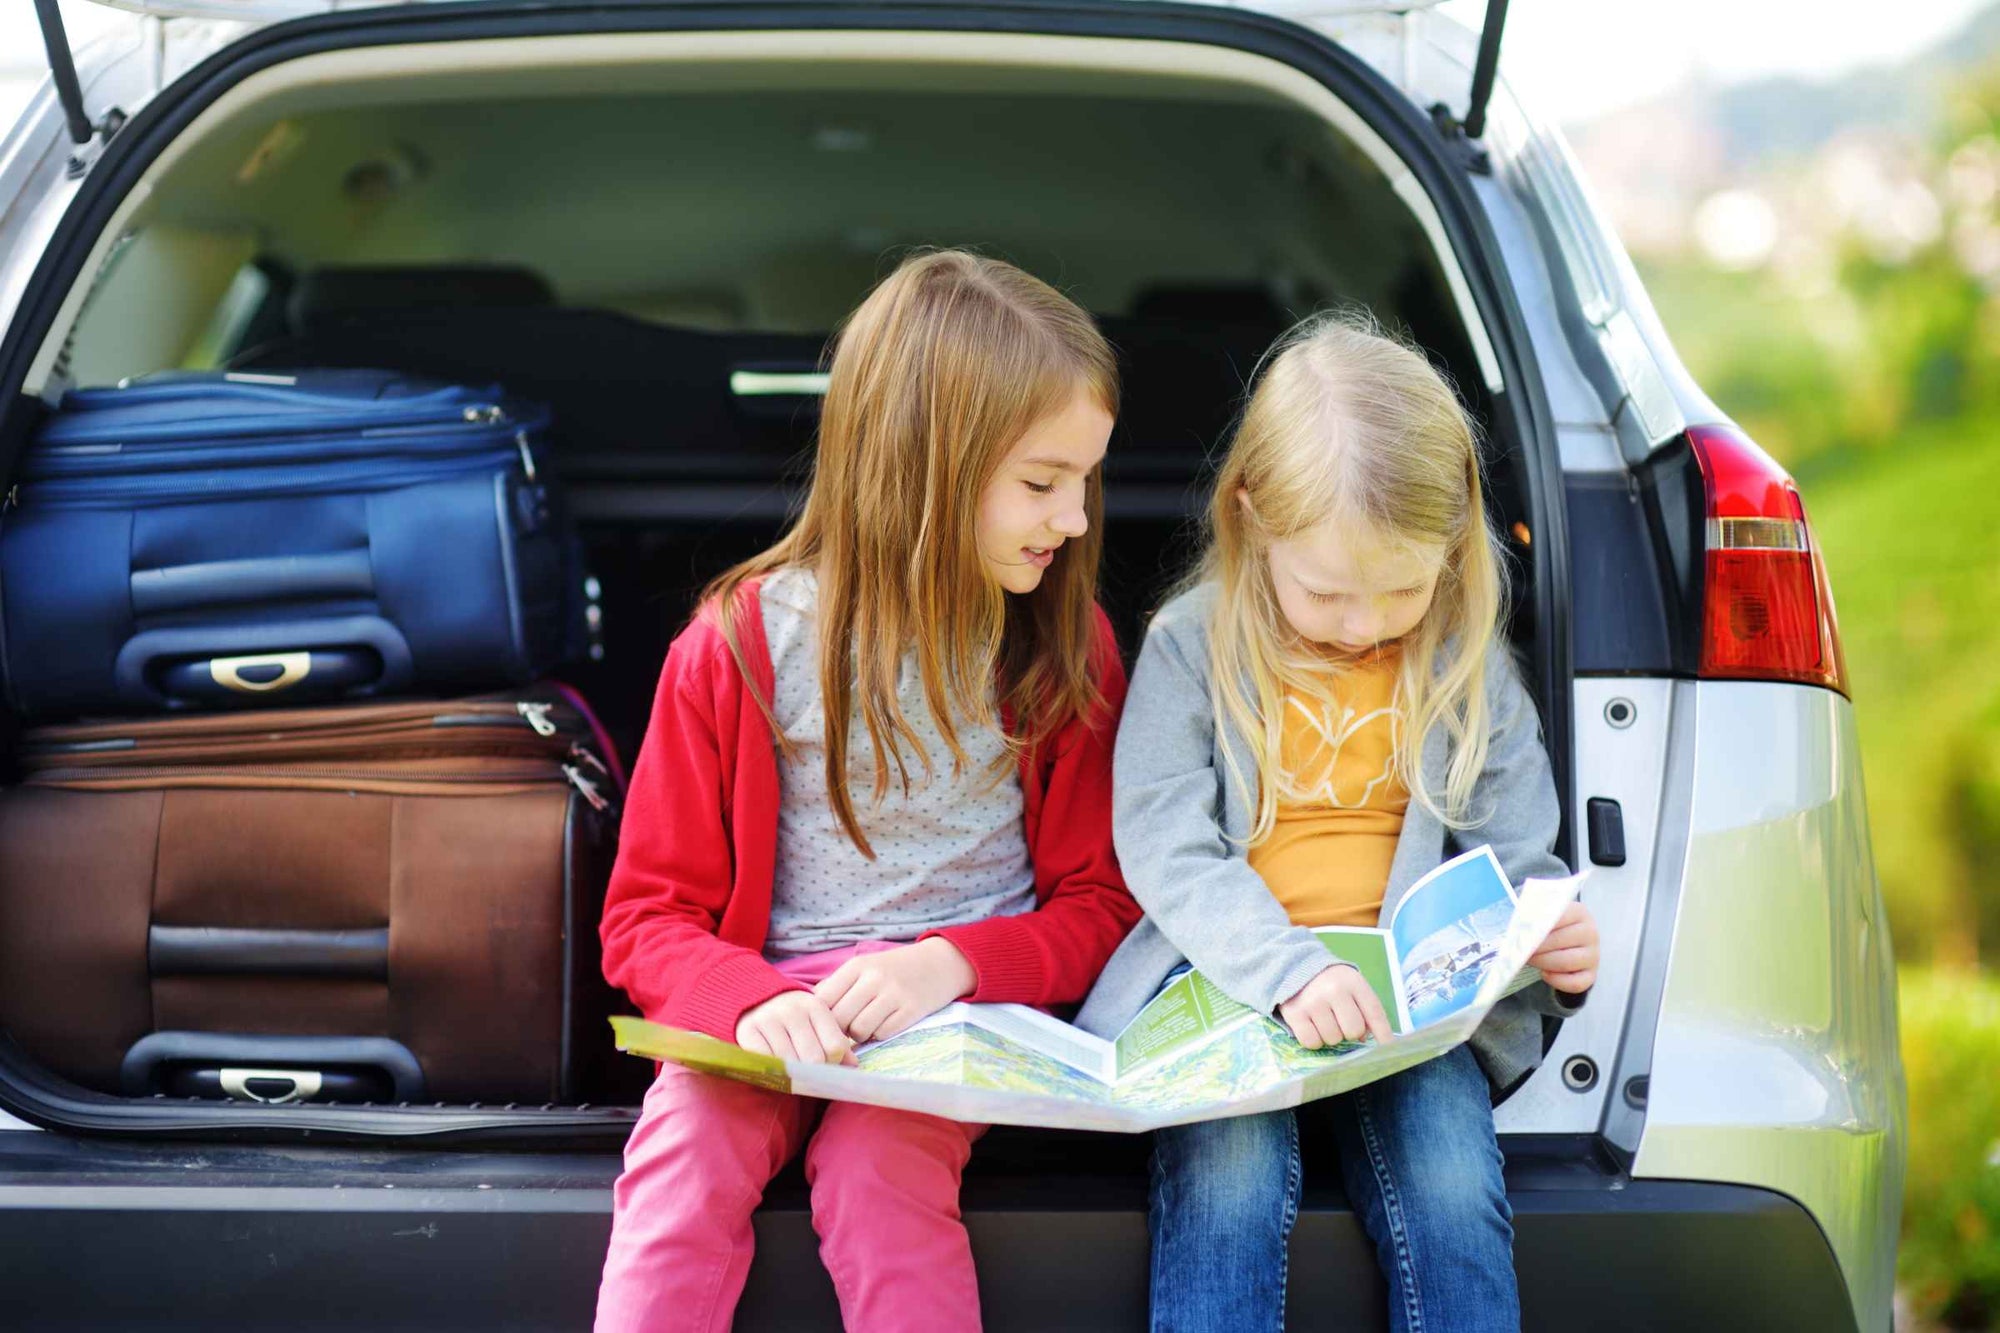 Image of two young girls sitting at the rear end of an open station wagon vehicle.  There are suitcases stacked inside the car and the girls are looking at a travel map.